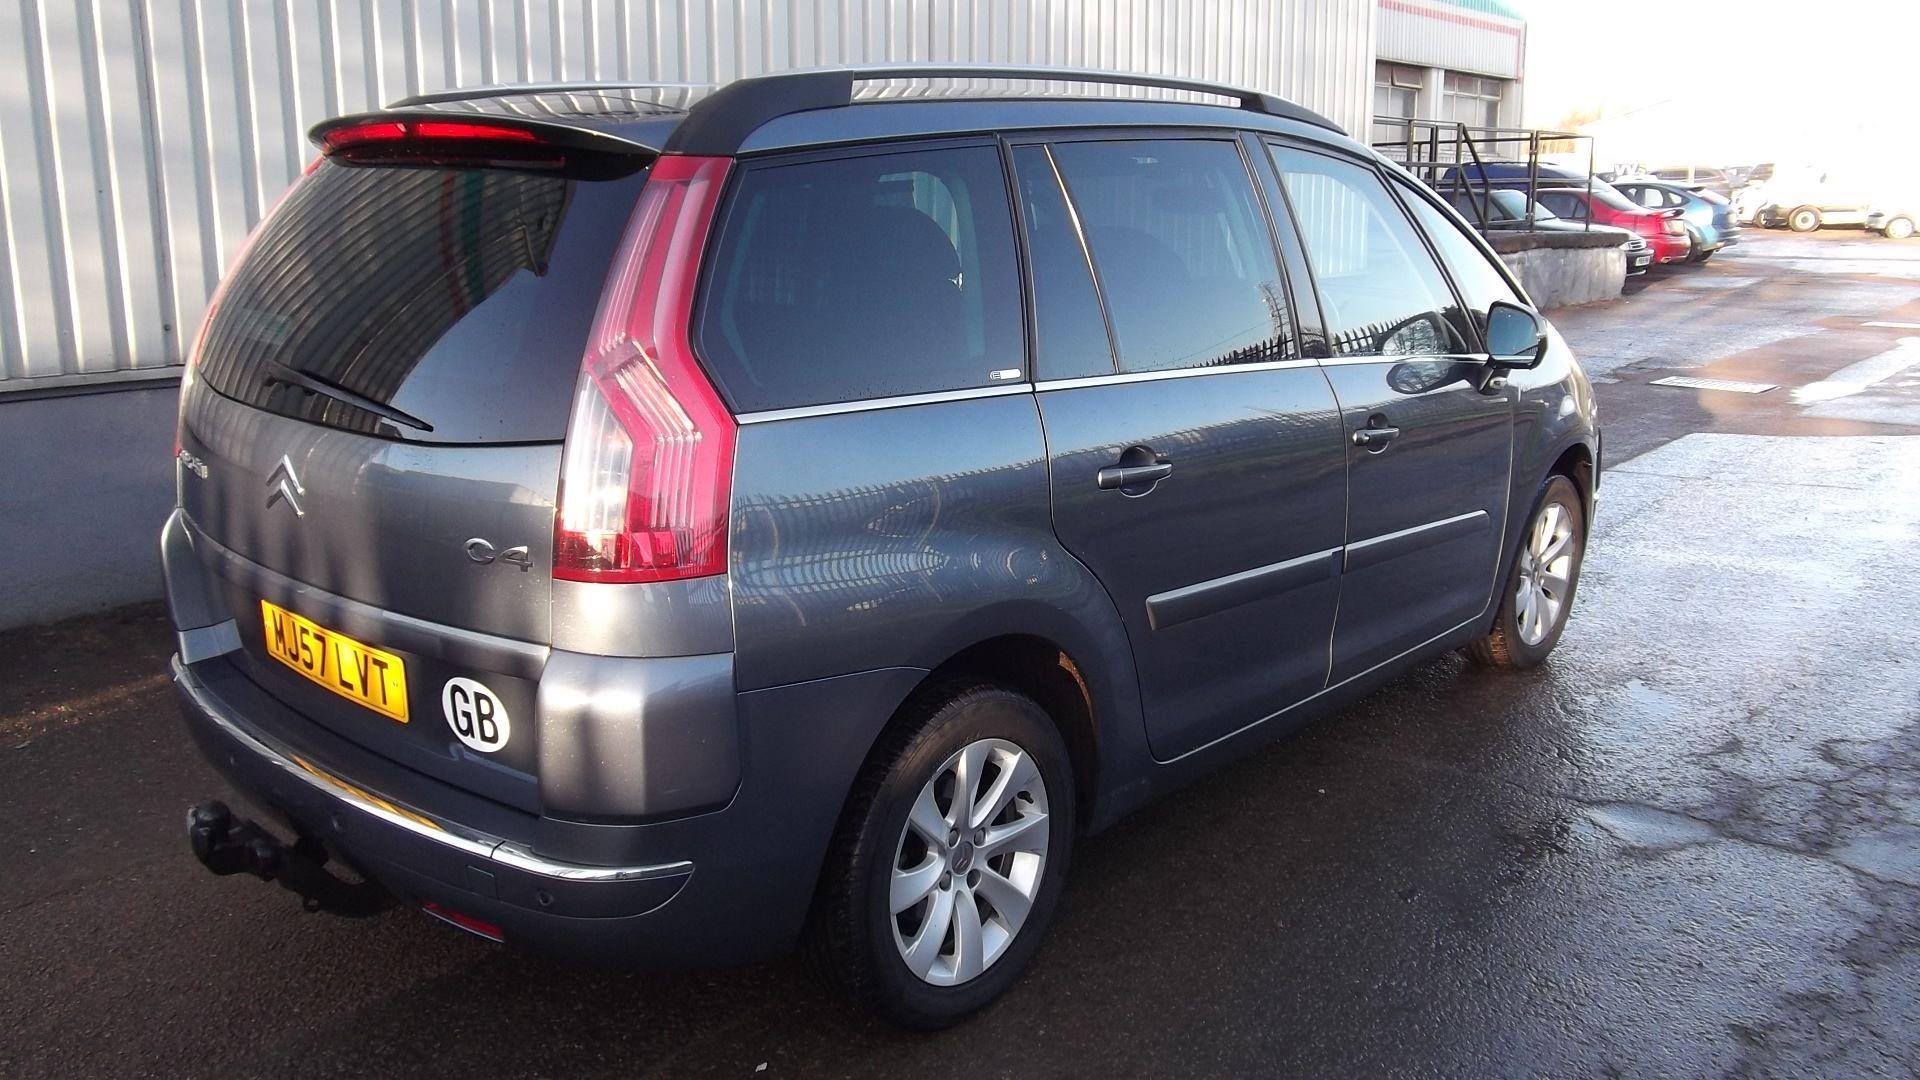 2007 Citroen C4 Picasso 7 Seater Exclusive 2.0 HDI Automatic 5 Door MPV - CL505 - NO VAT ON THE HAMM - Image 10 of 22